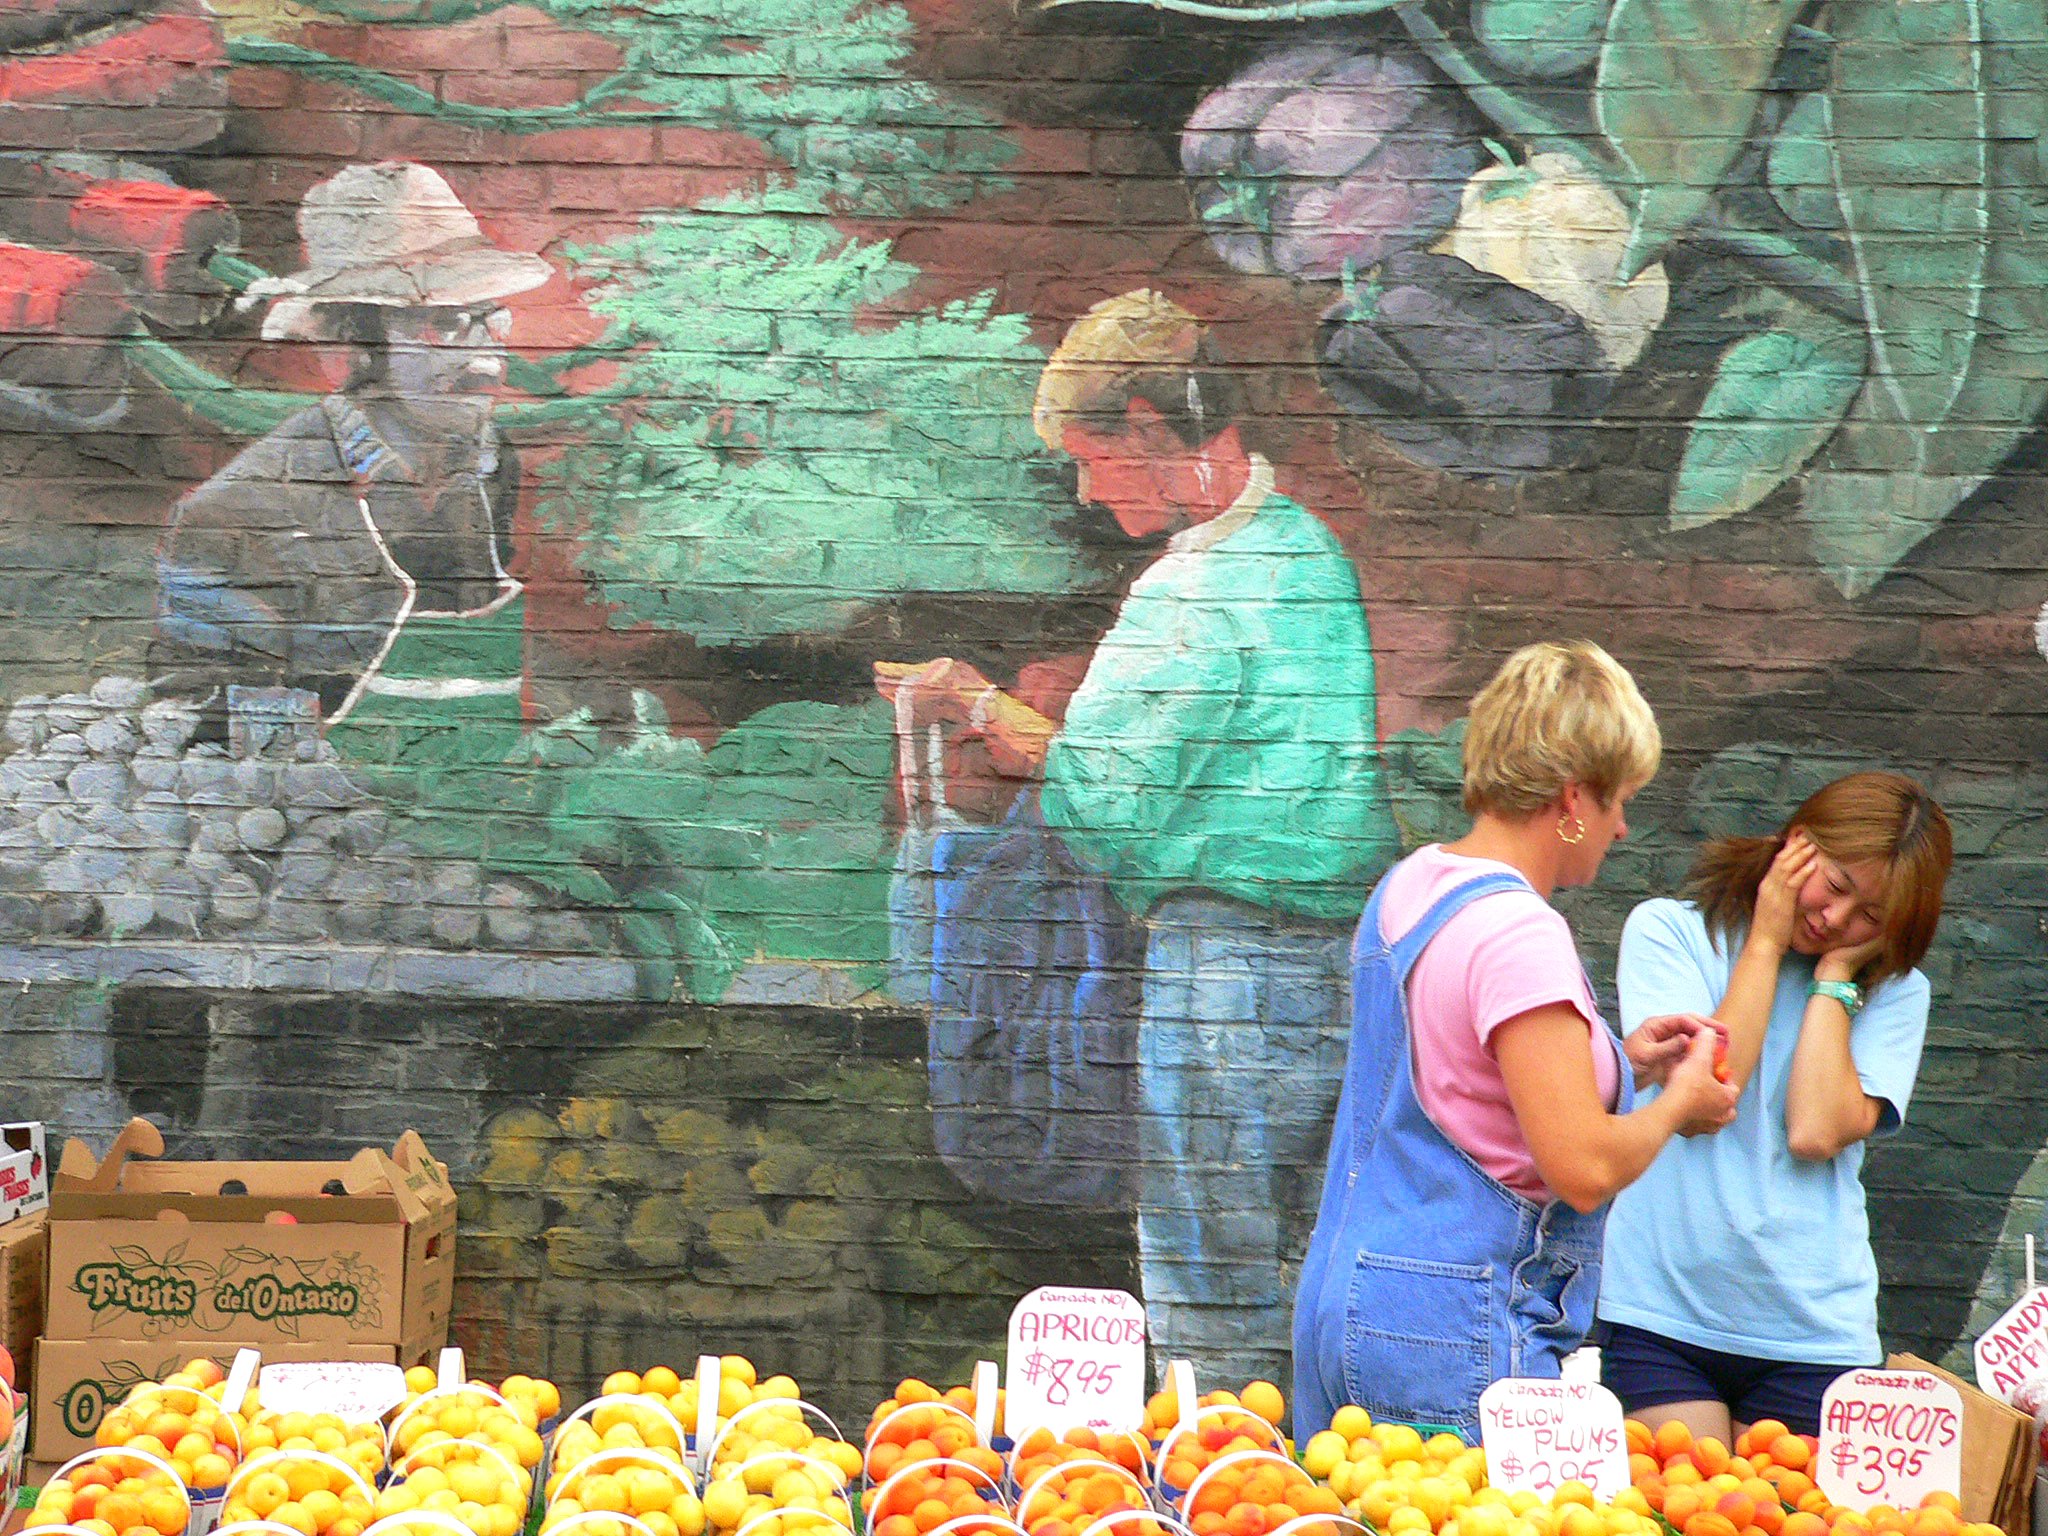 Mural at the market.